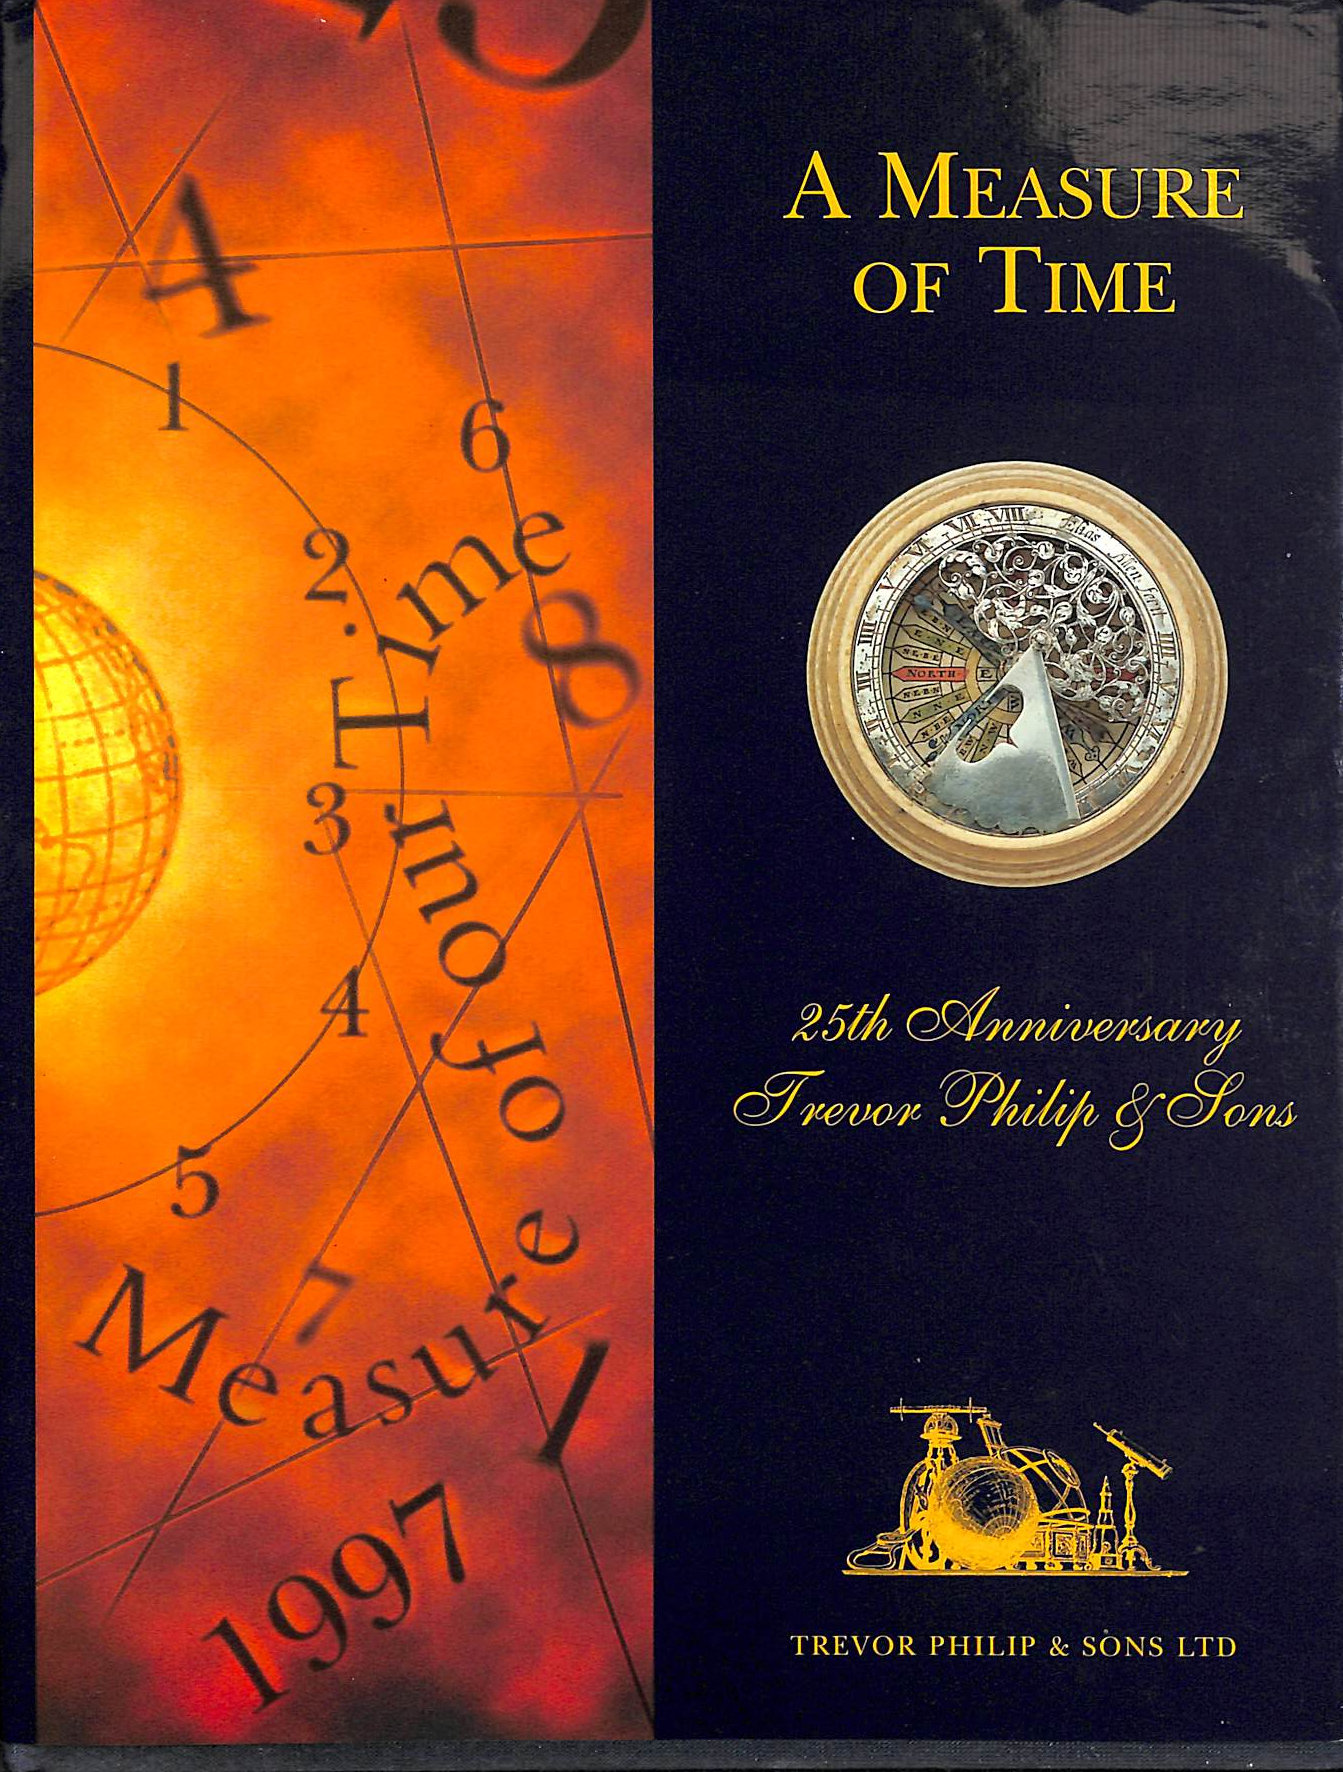 UNKNOWN - A Measure of Time - 25th Anniversary Trevor Philip & Sons LTD